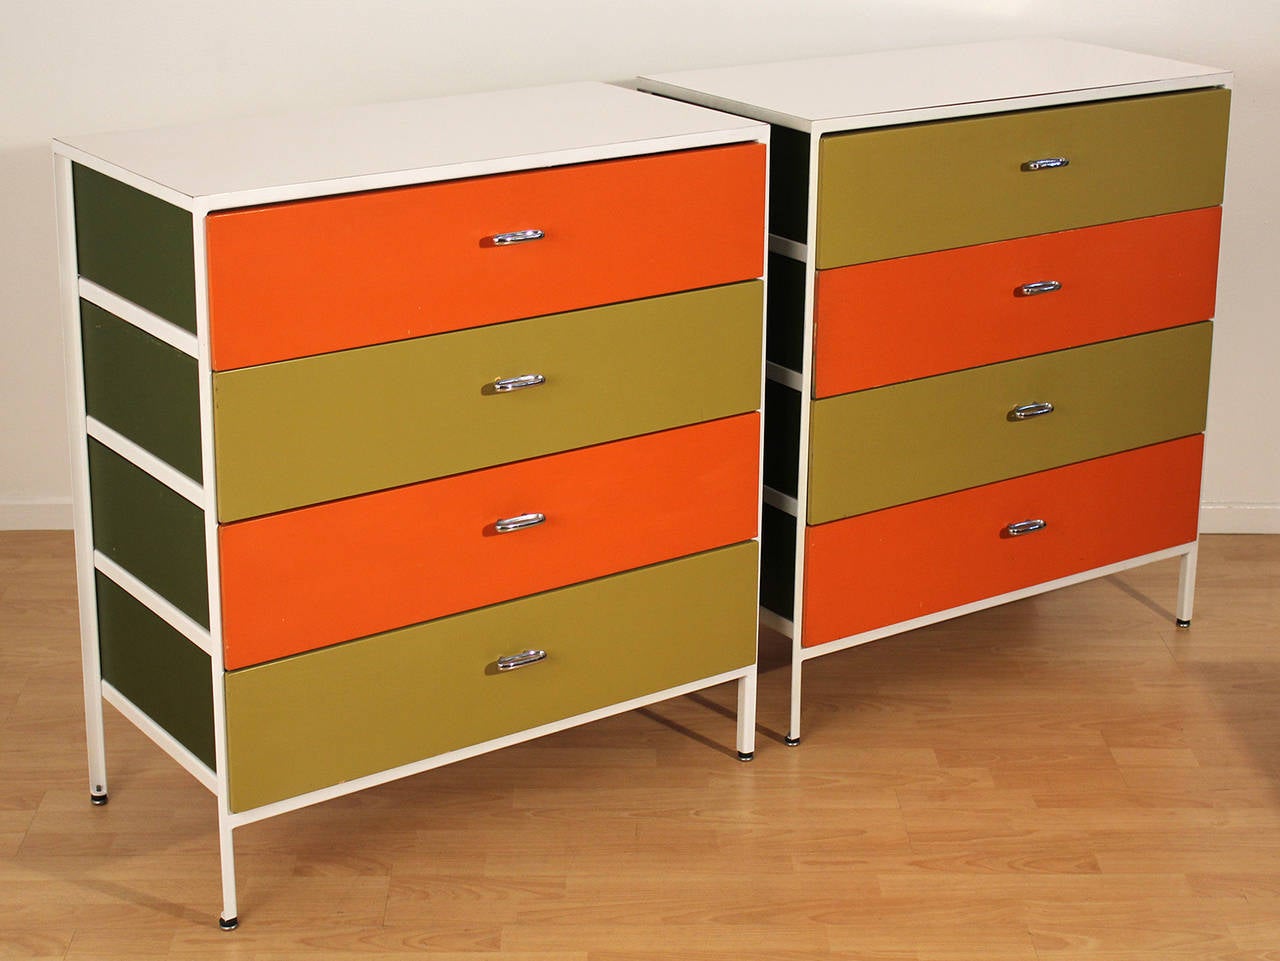 Prime examples of a vintage pair of dressers or chest of drawers designed by George Nelson for Herman Miller in a very uncommon four-drawer configuration with extraordinary color combination.

Completely original and unrestored throughout. Very